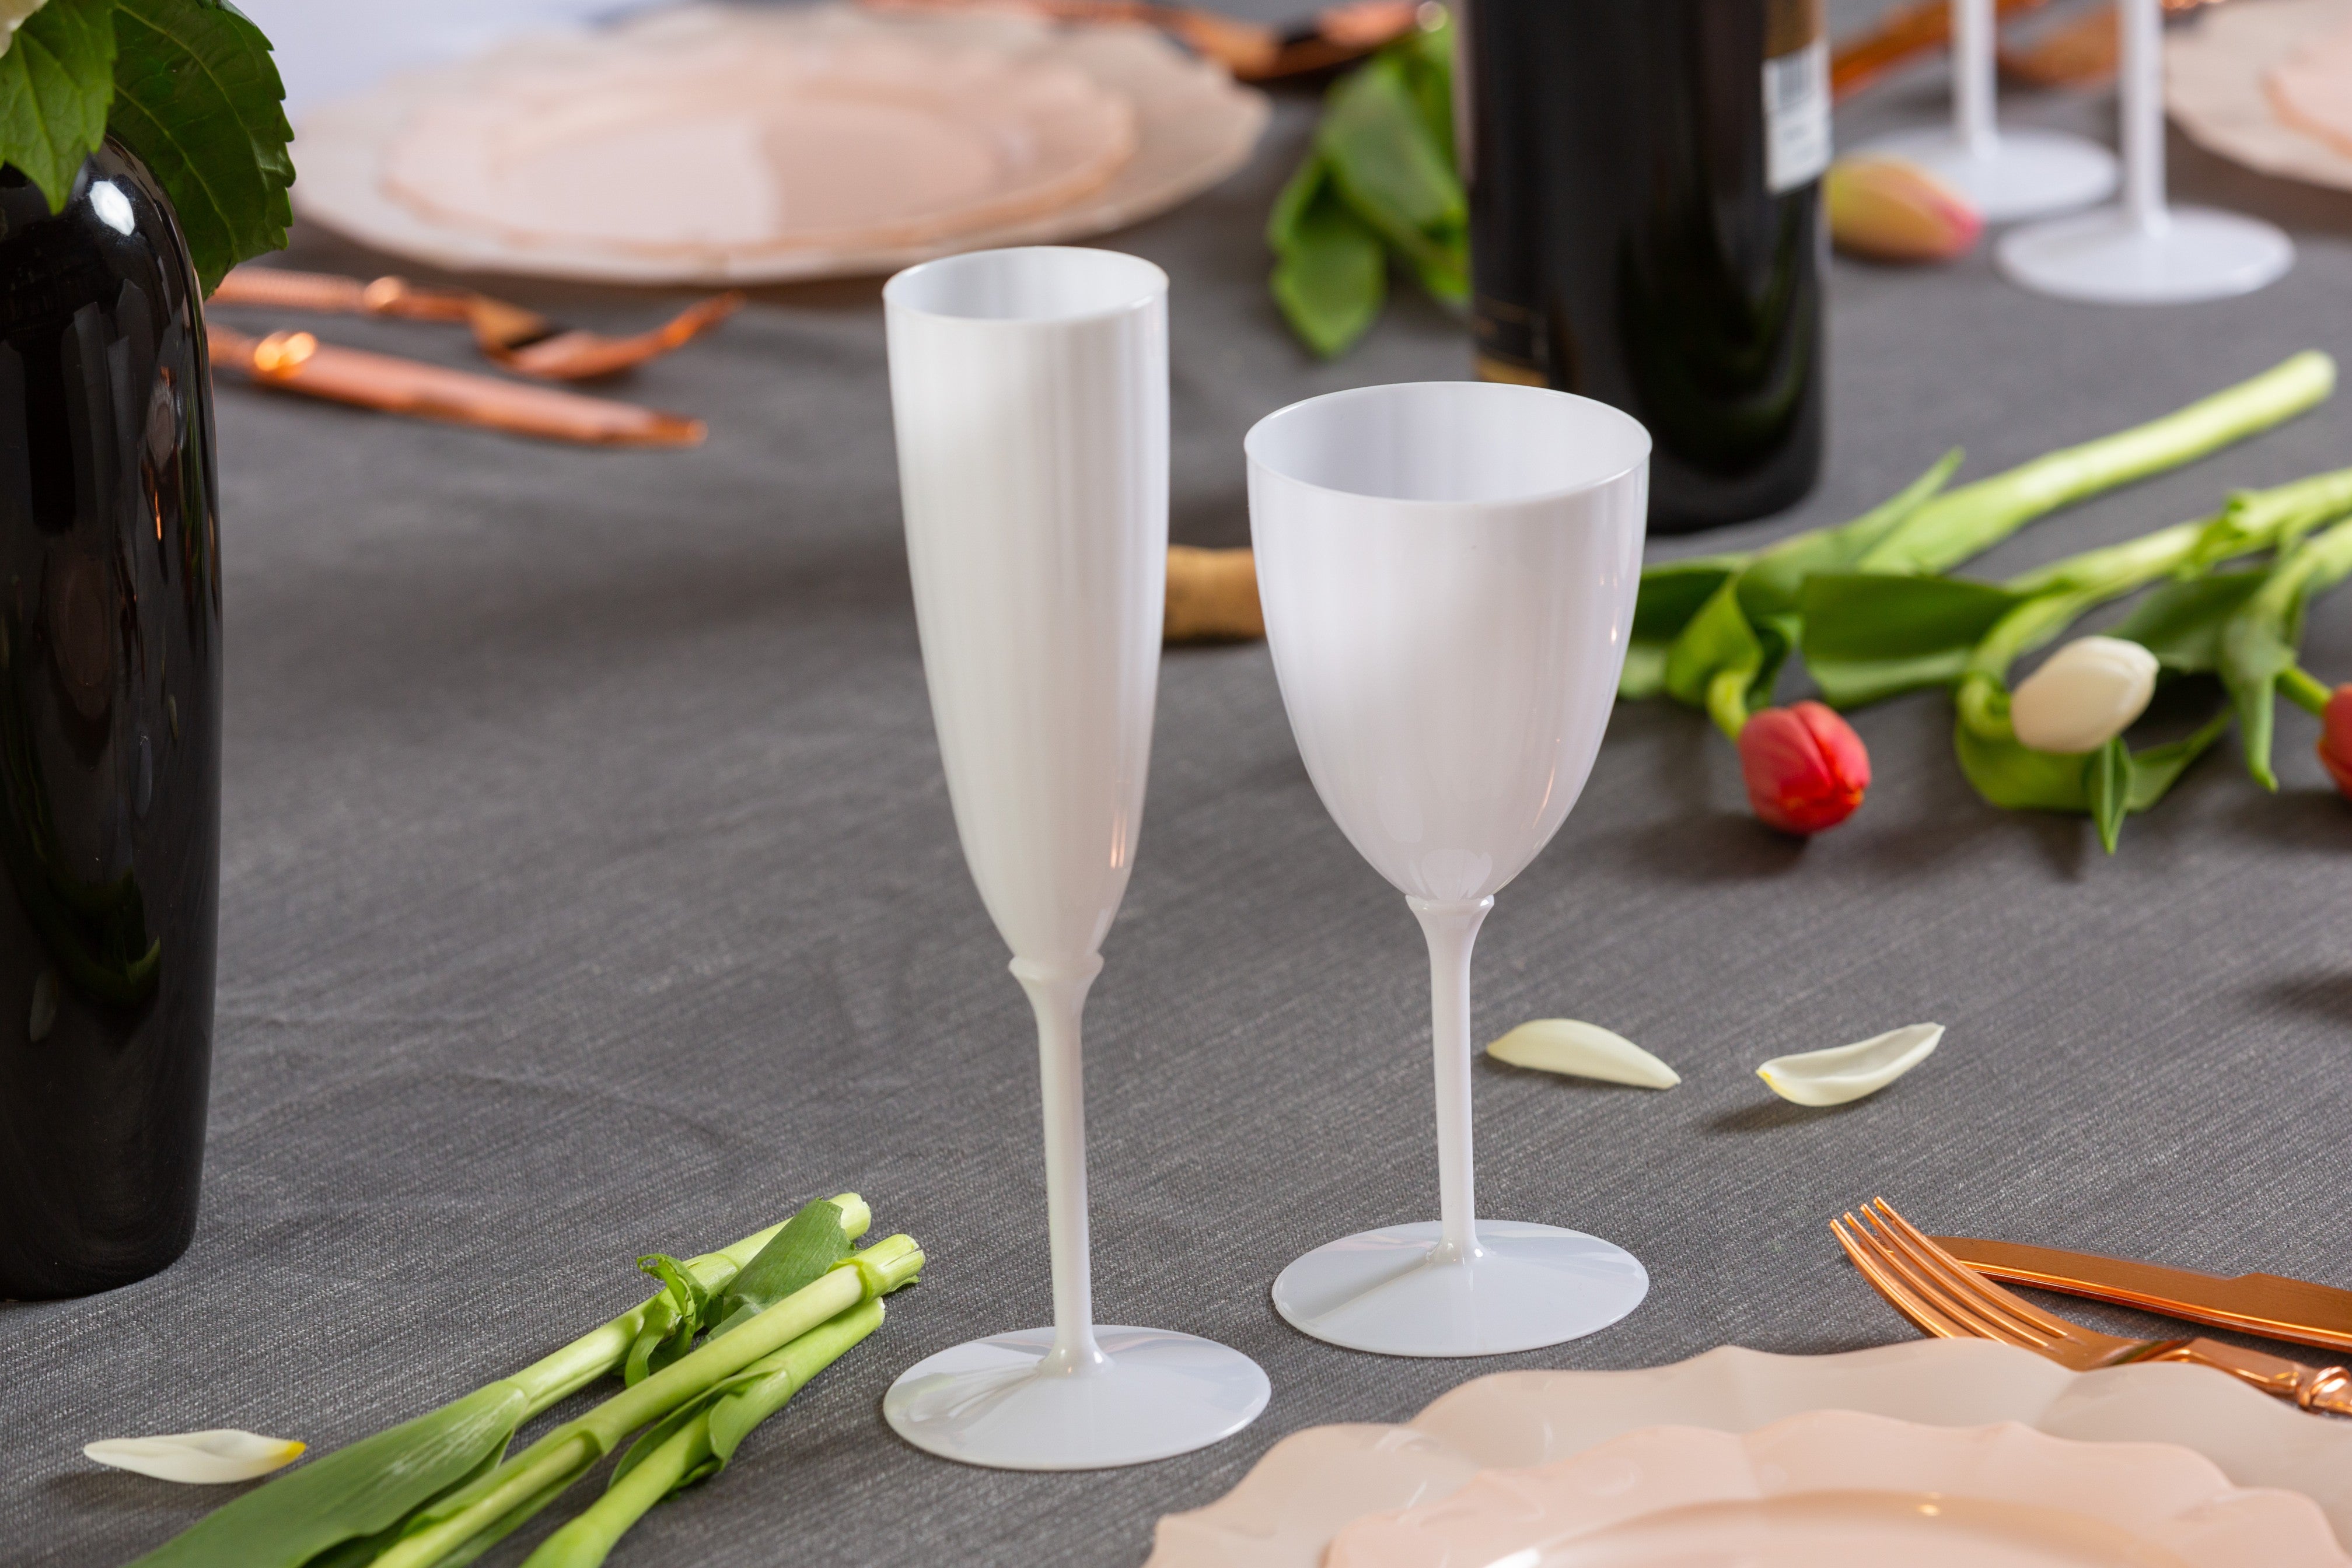 8 Pack - 6 oz.] Plastic Champagne Flutes White Disposable Champagne  Toasting Glasses Fancy Stemmed Cups for Parties, Weddings, and Dining  Durable Reusable - Posh Setting 